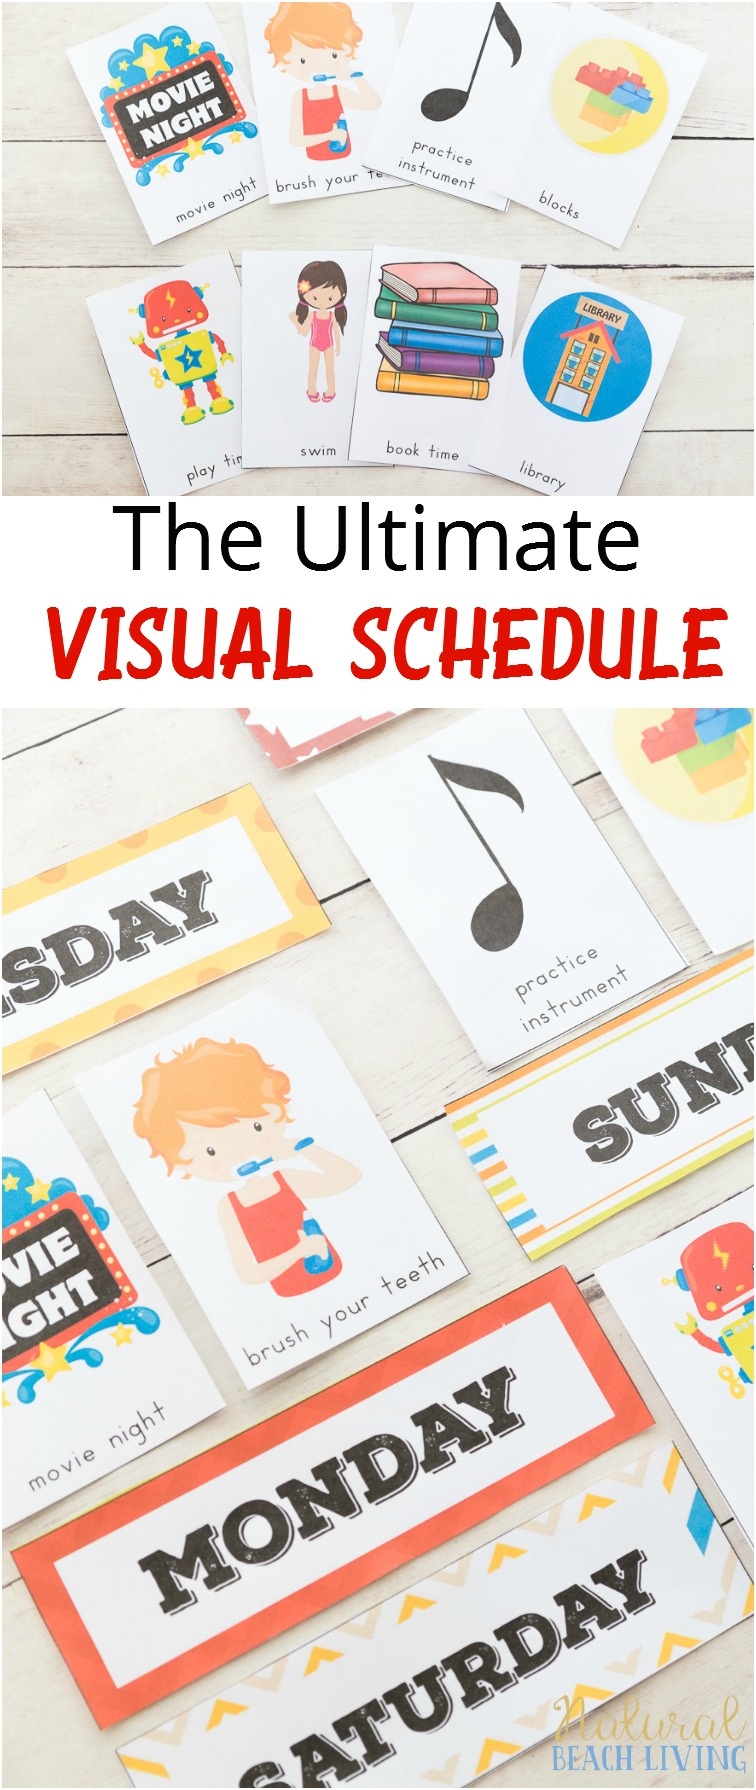 Extra Daily Visual Schedule Cards Free Printables - Natural Beach Living - Free Printable Picture Schedule Cards